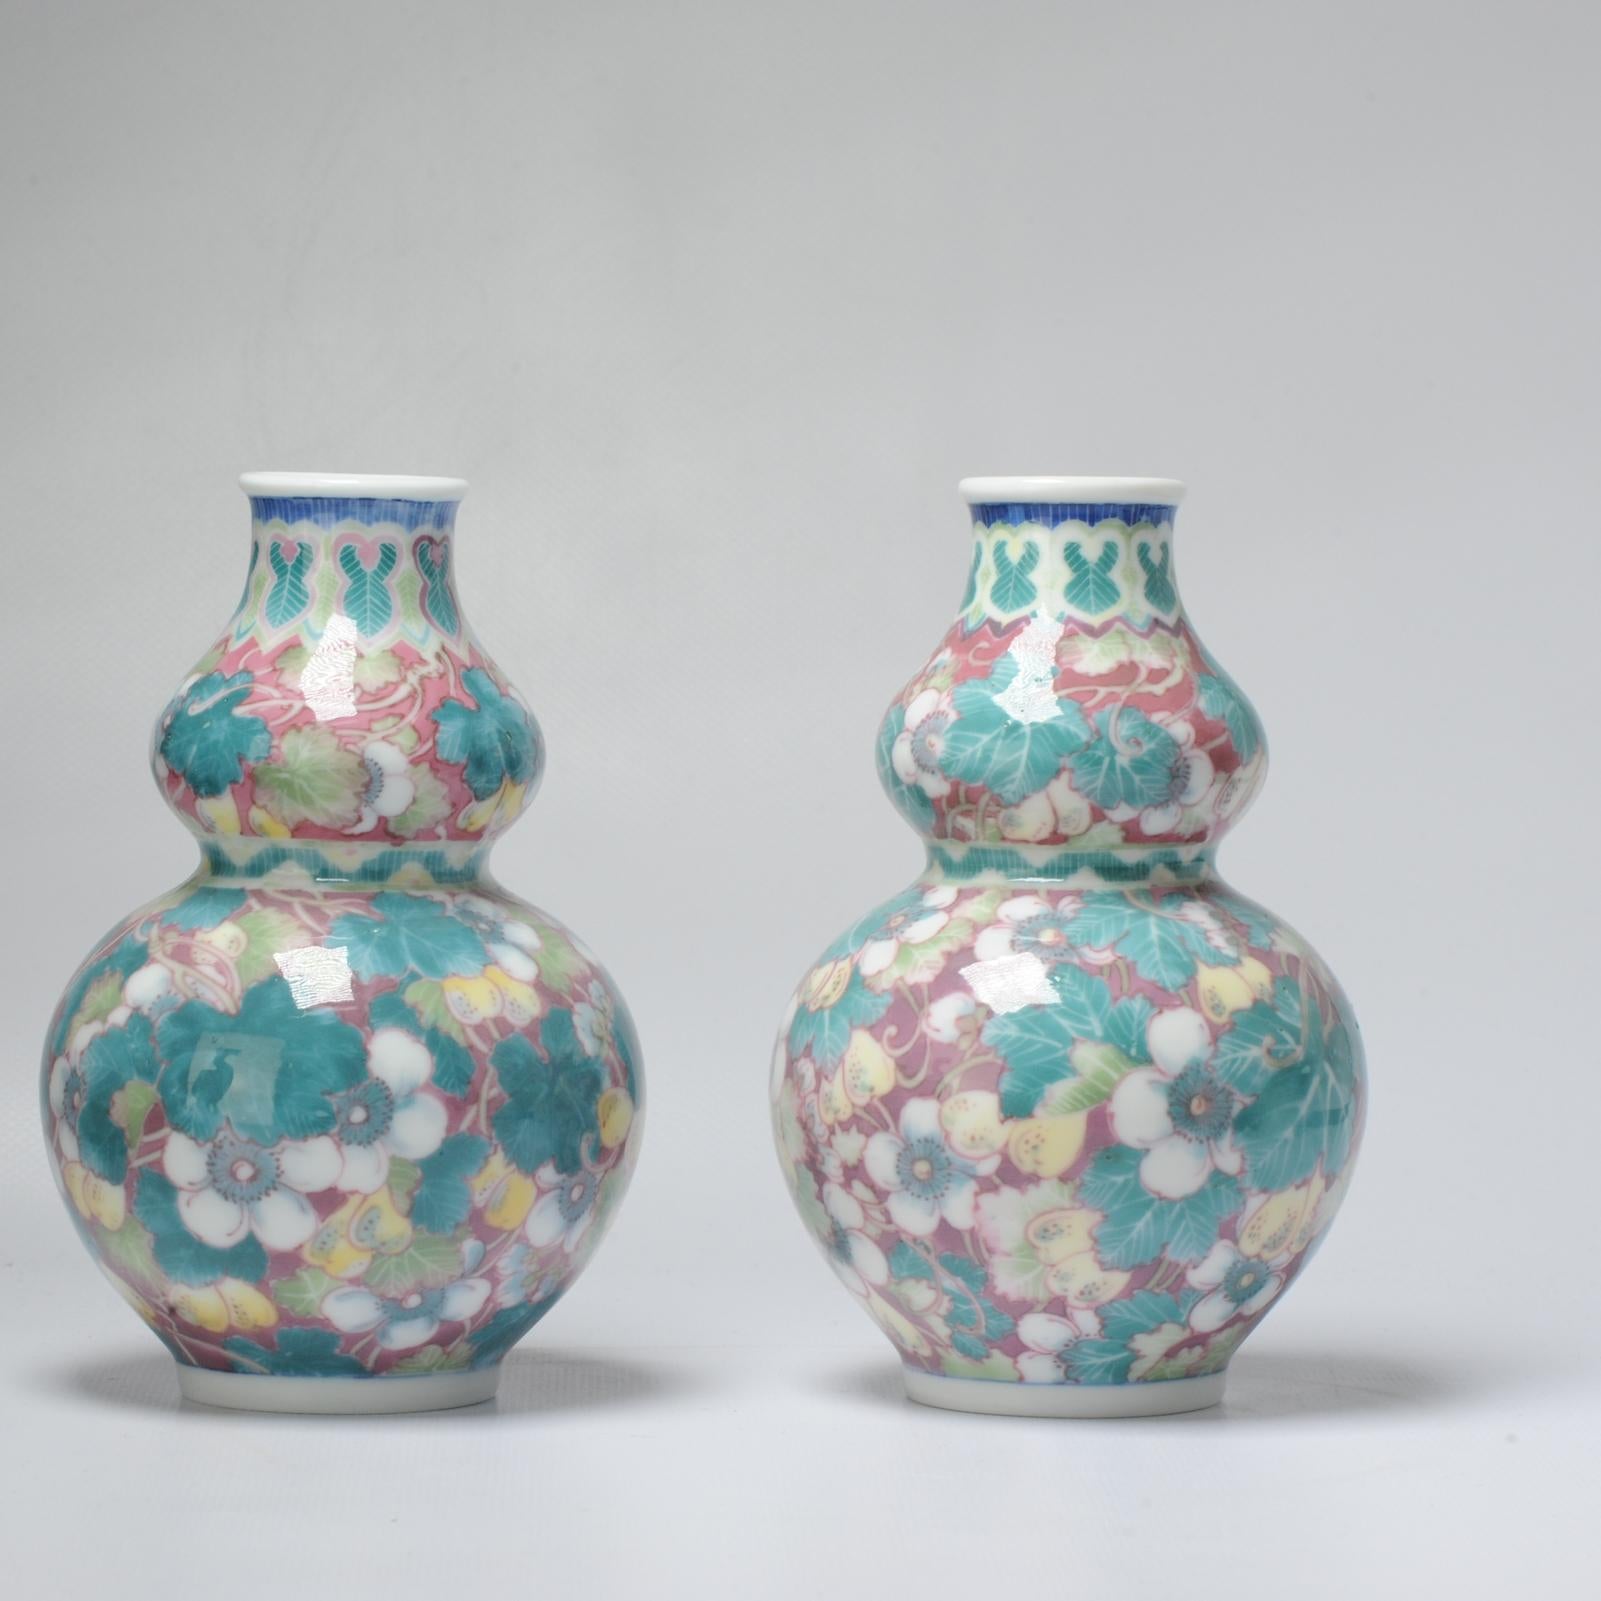 Rare Vintage 20c Chinese Porcelain Proc Lemon Vases China Underglaze In Excellent Condition For Sale In Amsterdam, Noord Holland